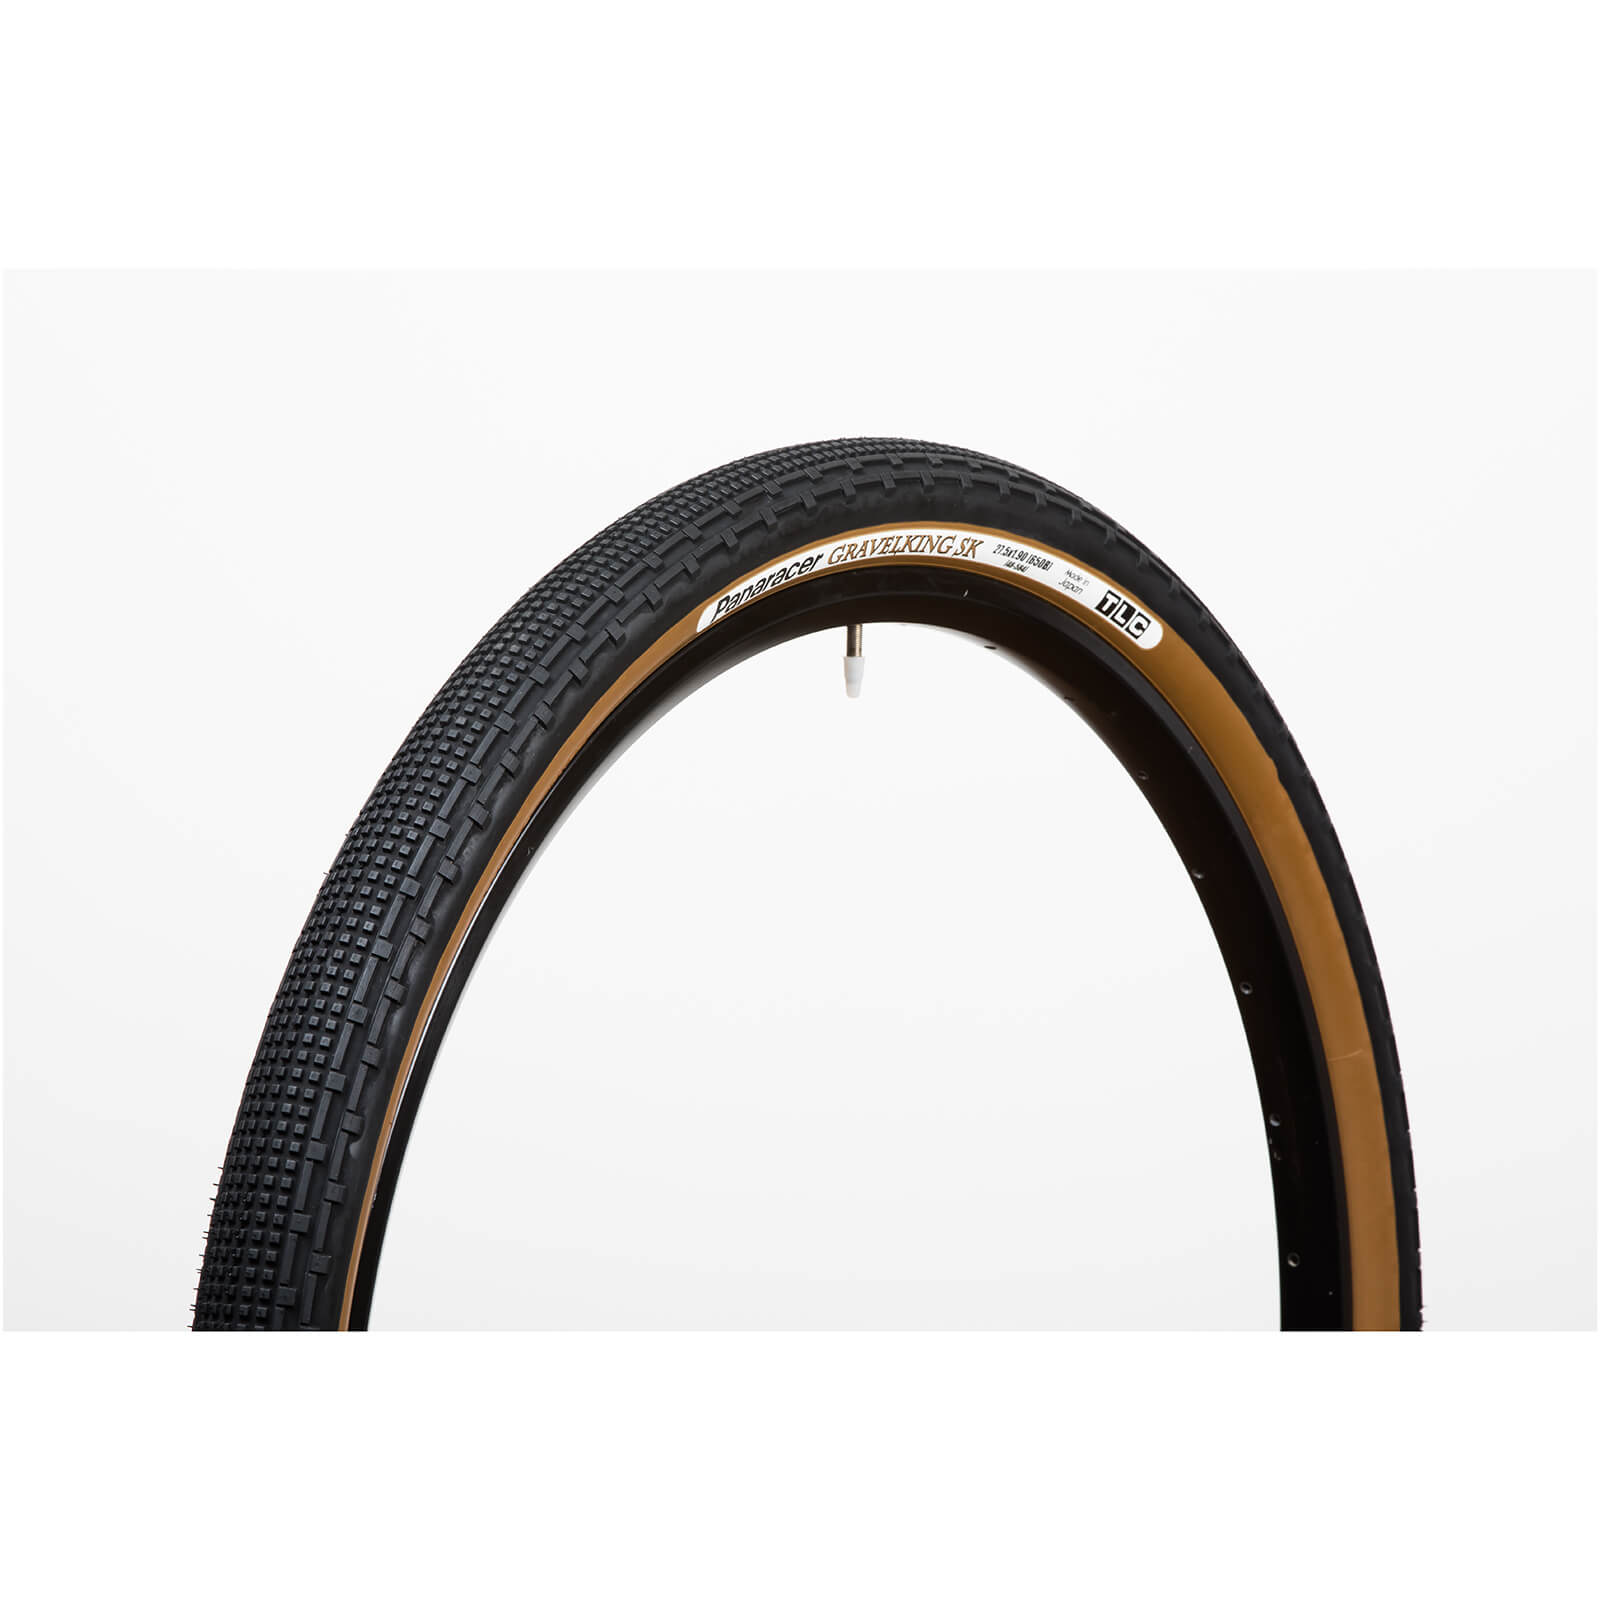 Panaracer Gravel King SK Tubeless Compatible Clincher Tyre - 27.5in x 1.75in - black/brown